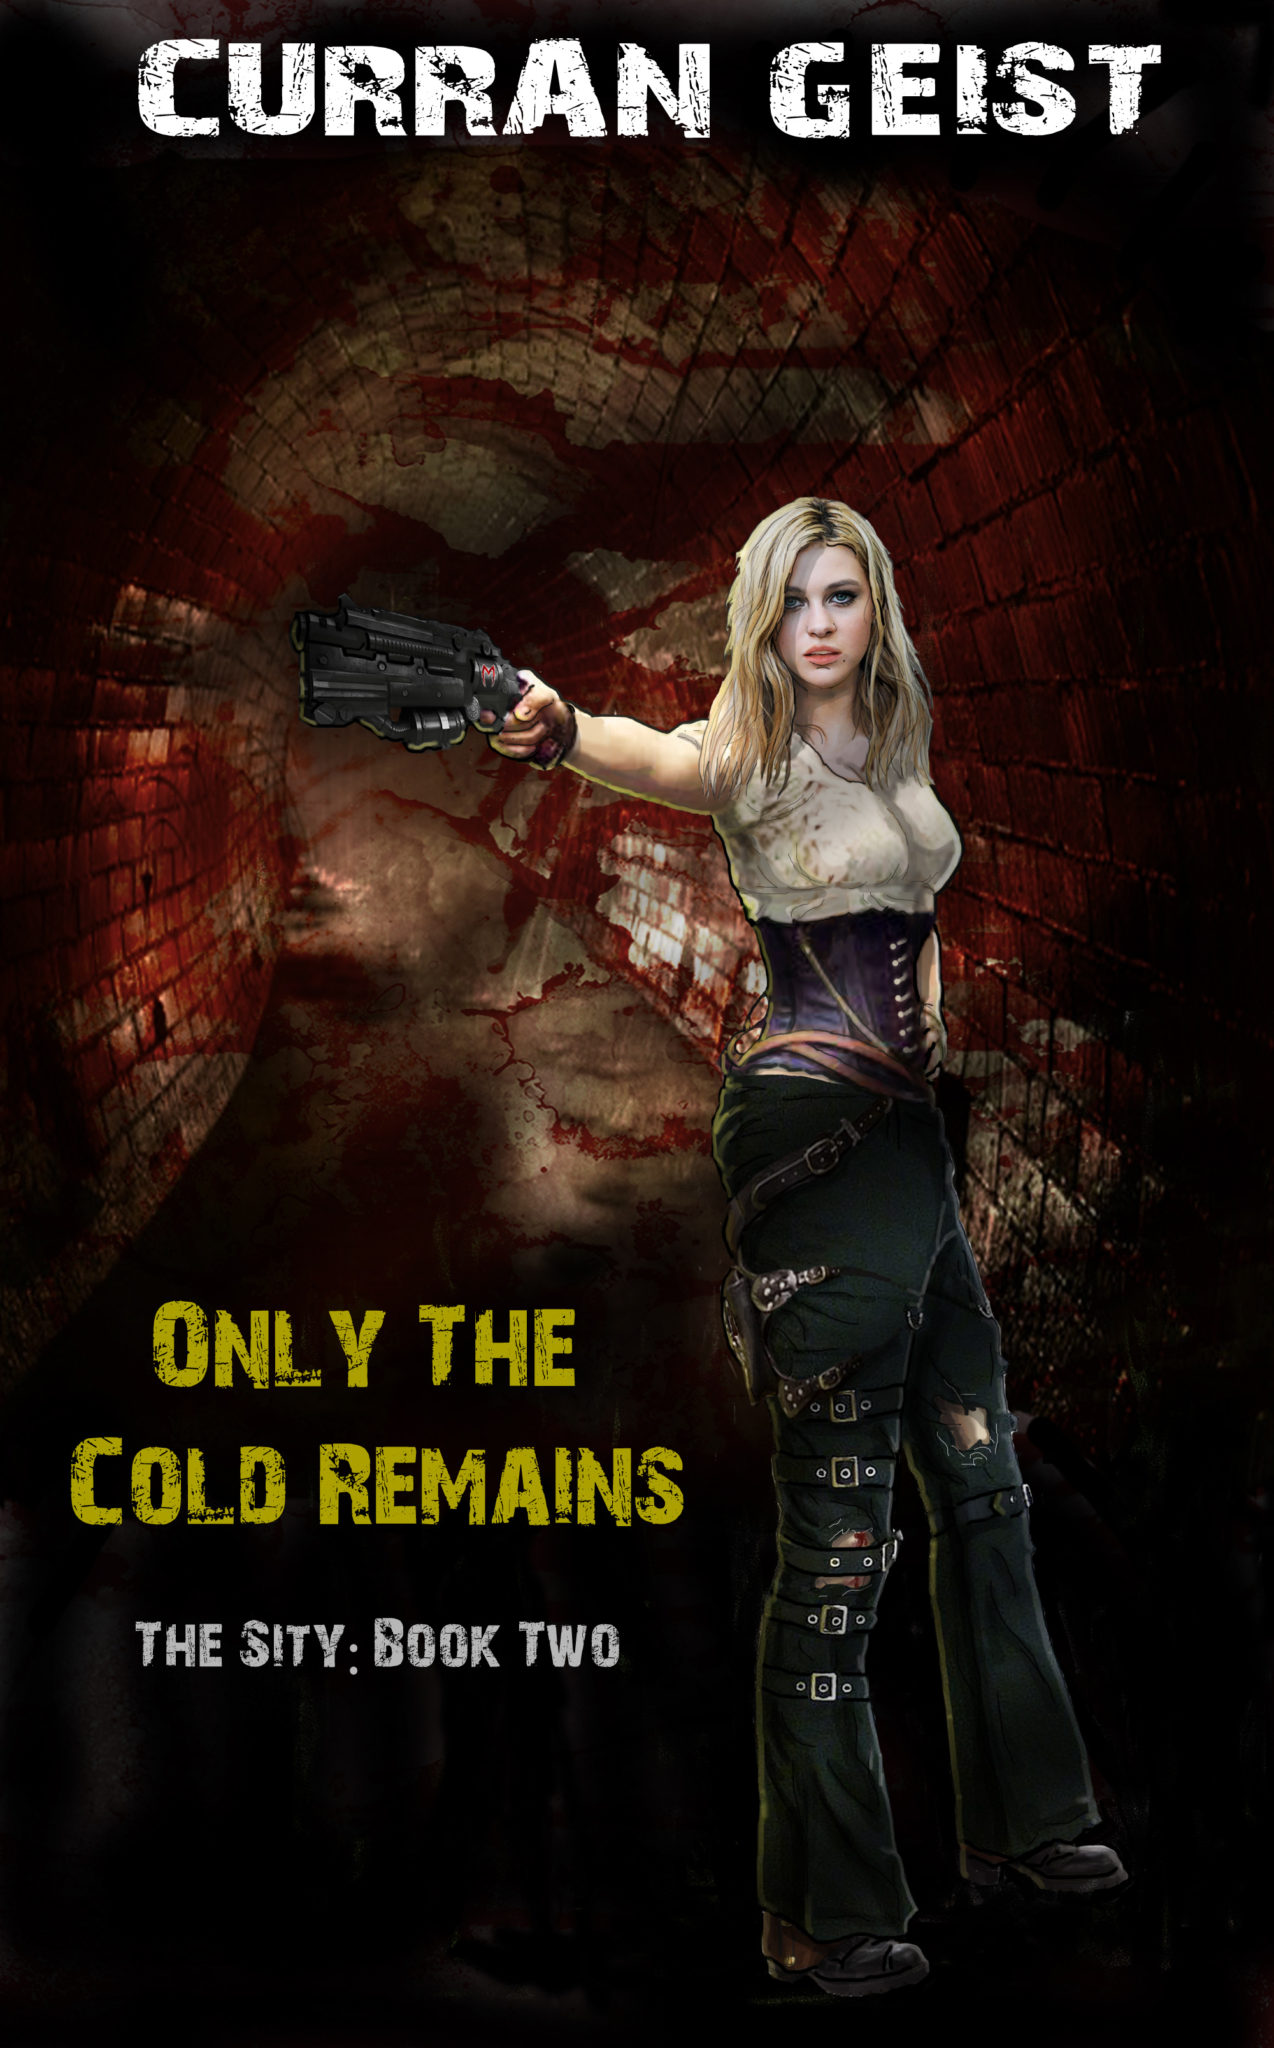 FREE: Only the Cold Remains by Curran Geist